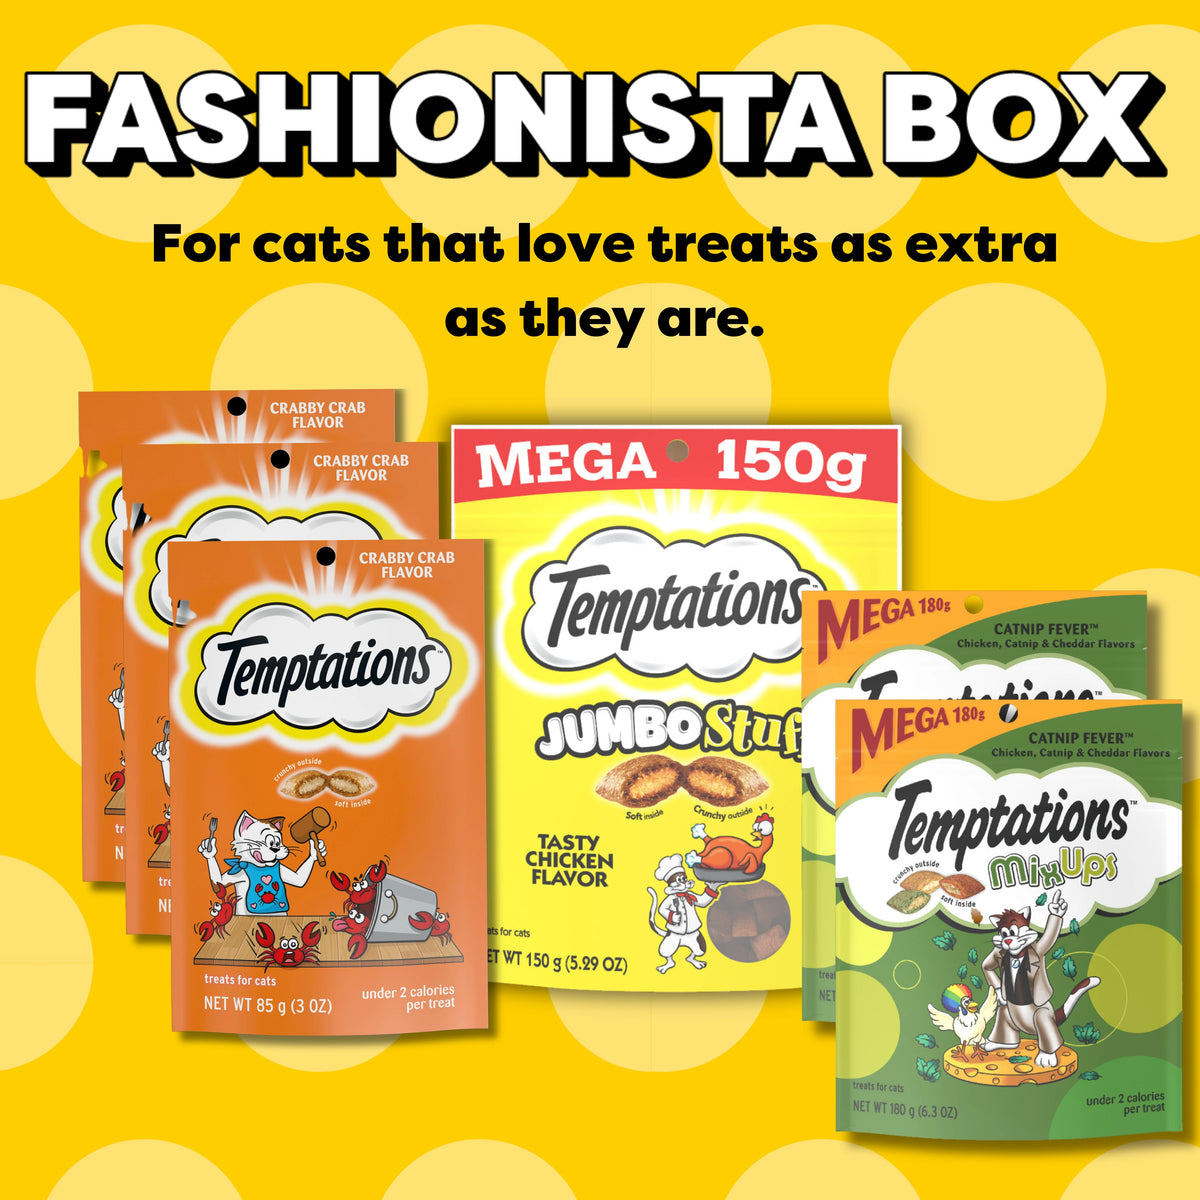 Fashionista box: for cats that love treats as extra as they are